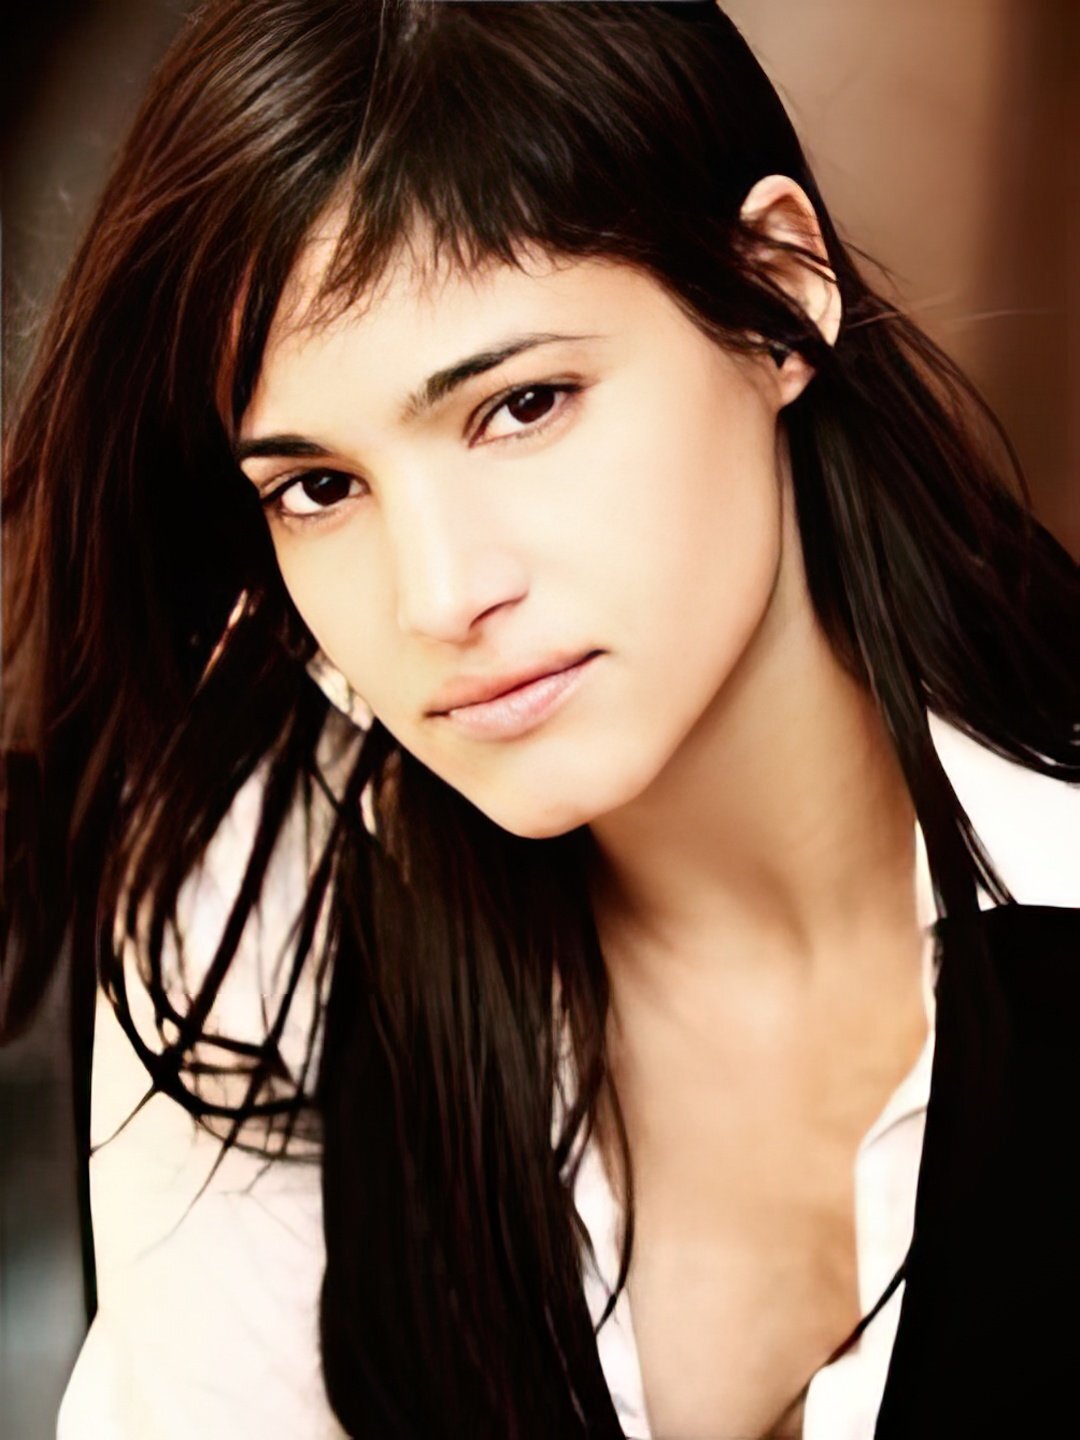 Sofia Boutella how did she became famous